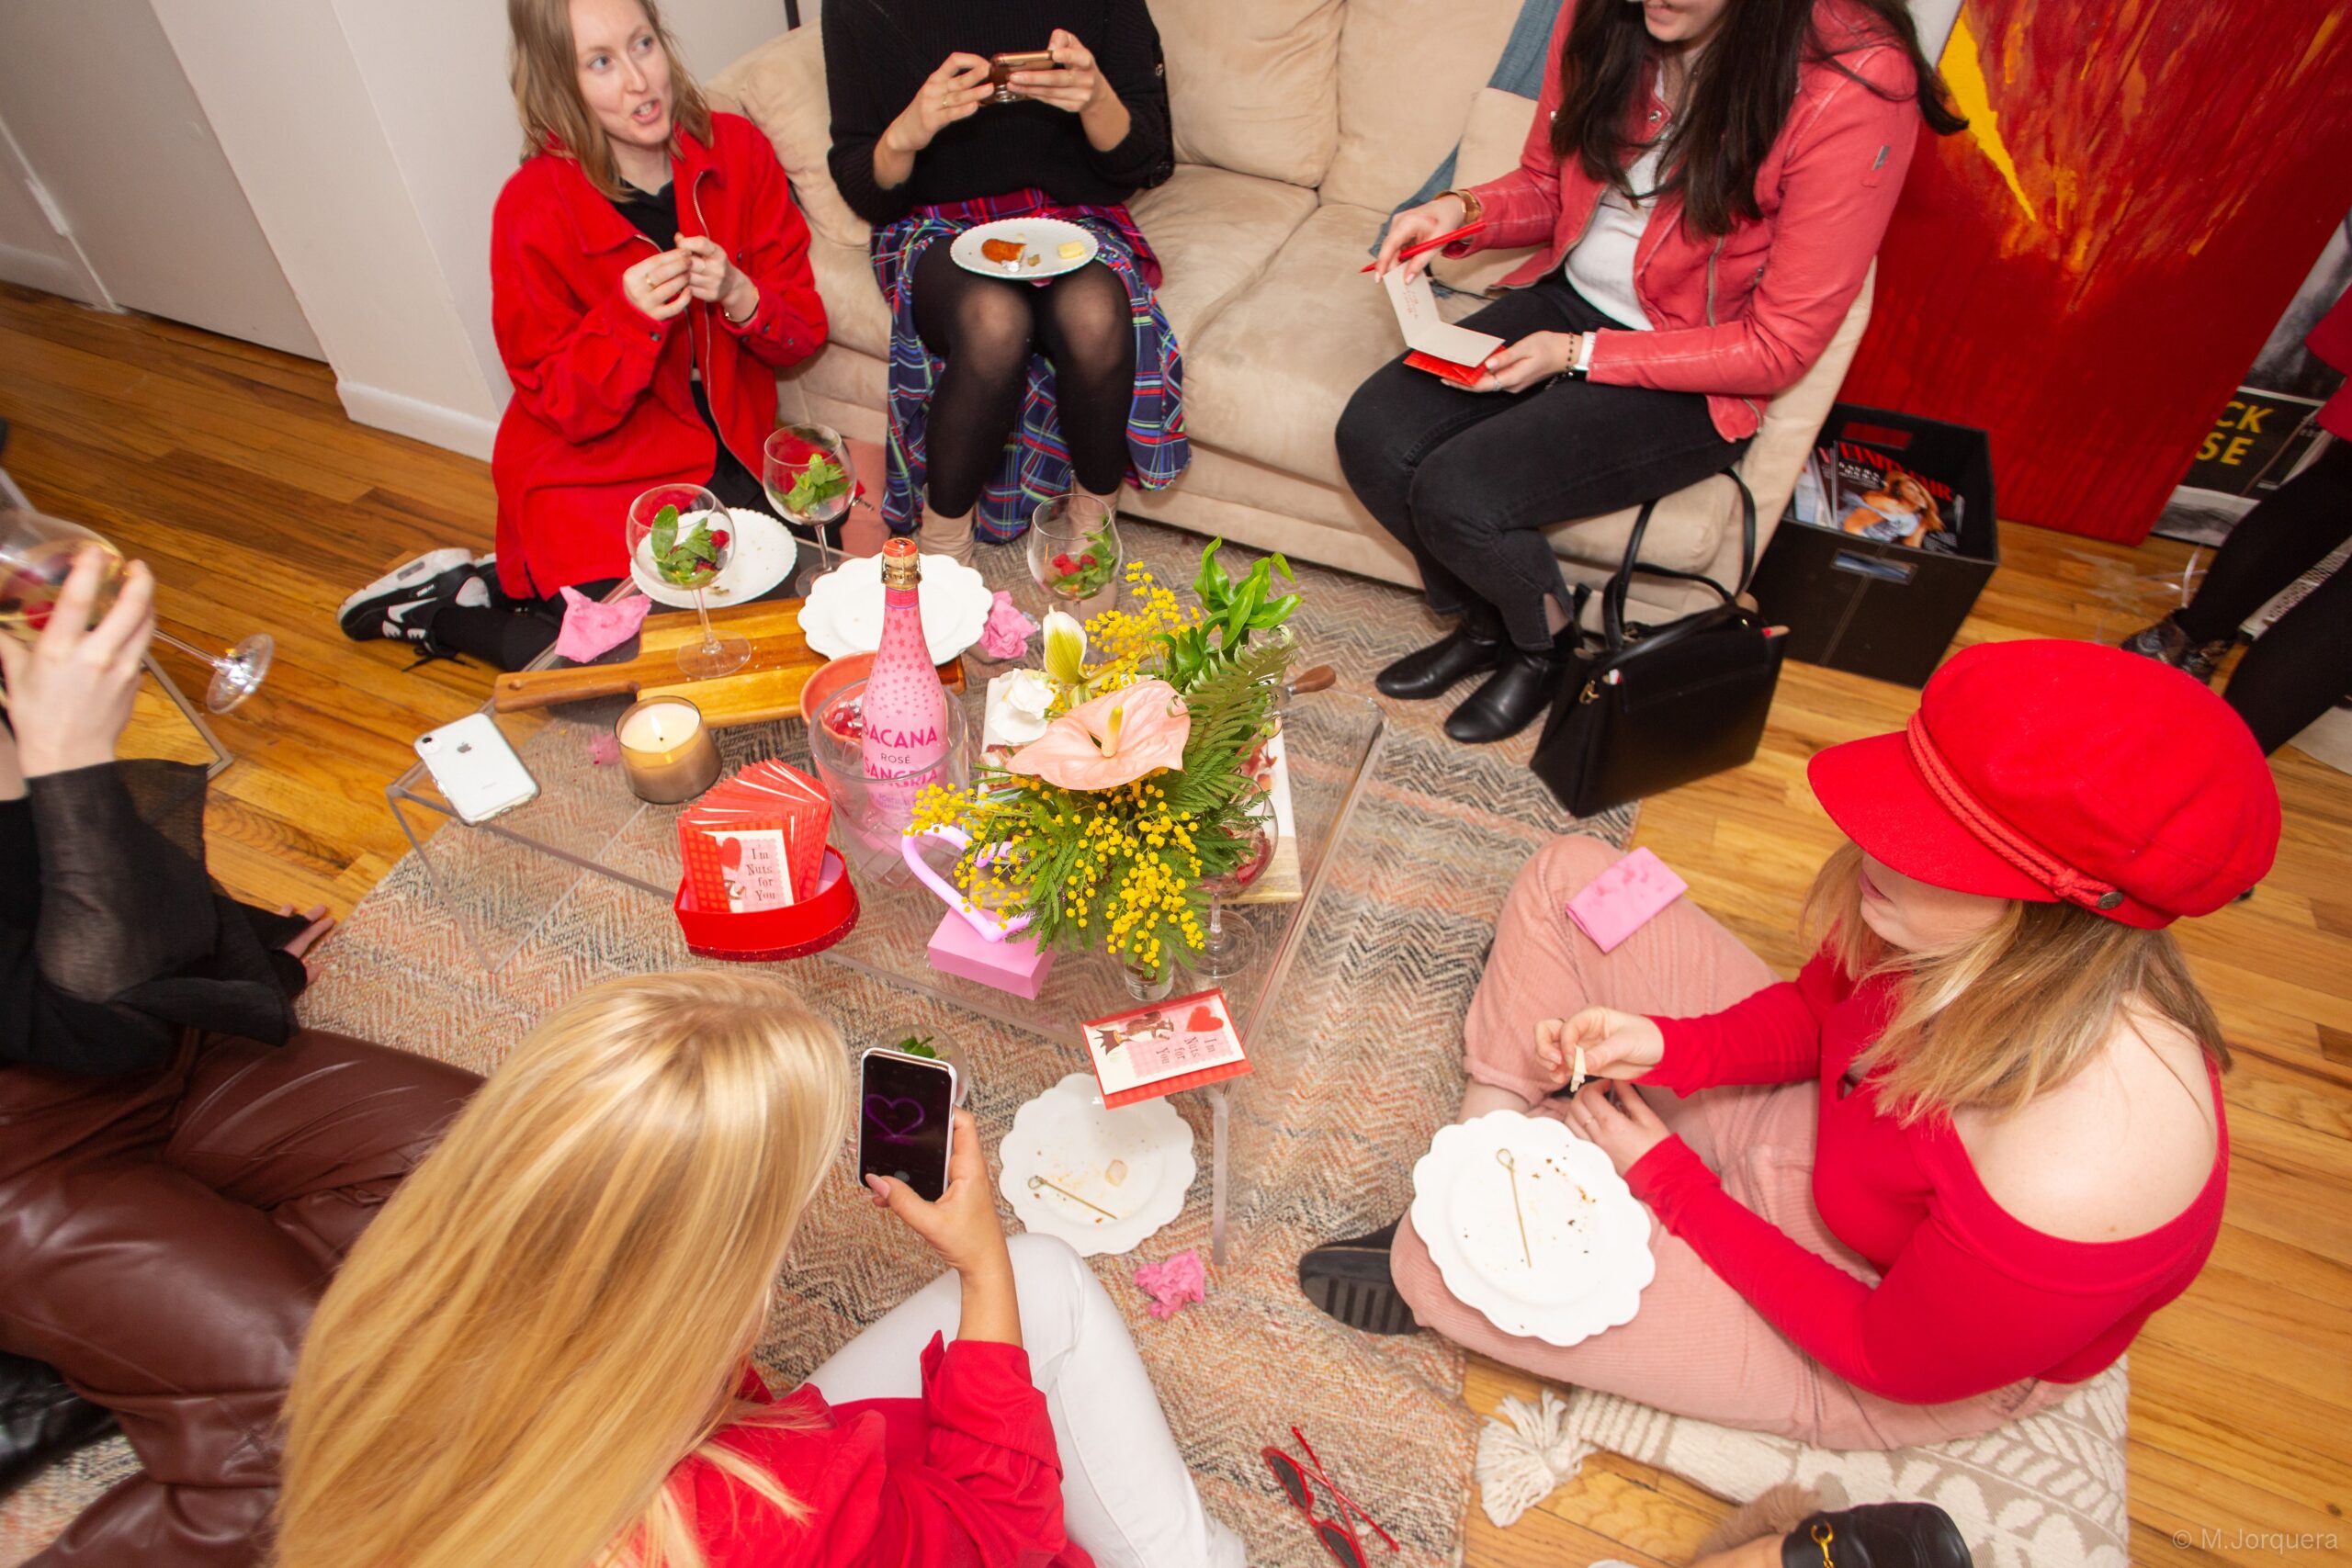 GALENTINE'S DAY PARTY ACTIVITY